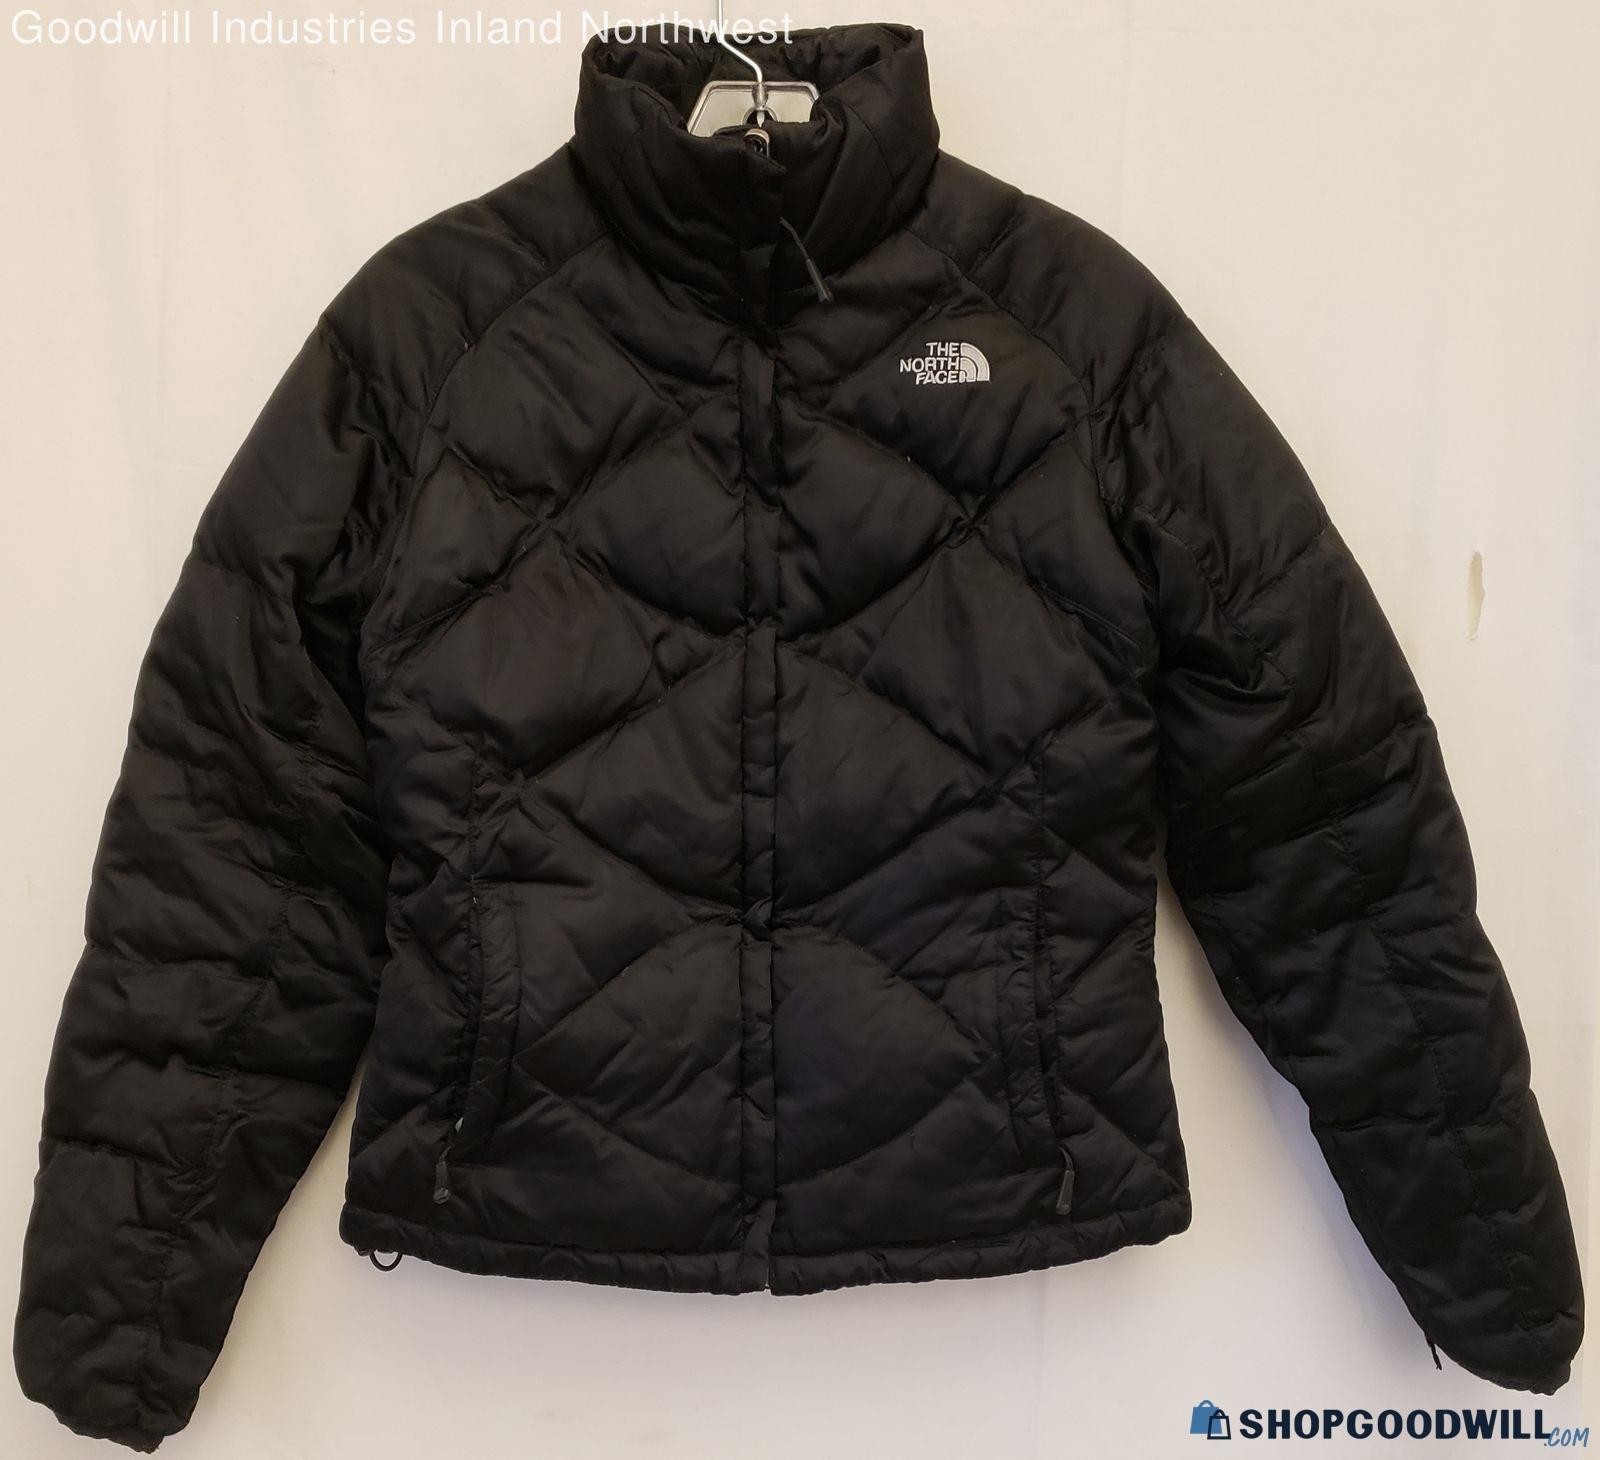 Women's The North Face Black Puff Jacket Size S - shopgoodwill.com